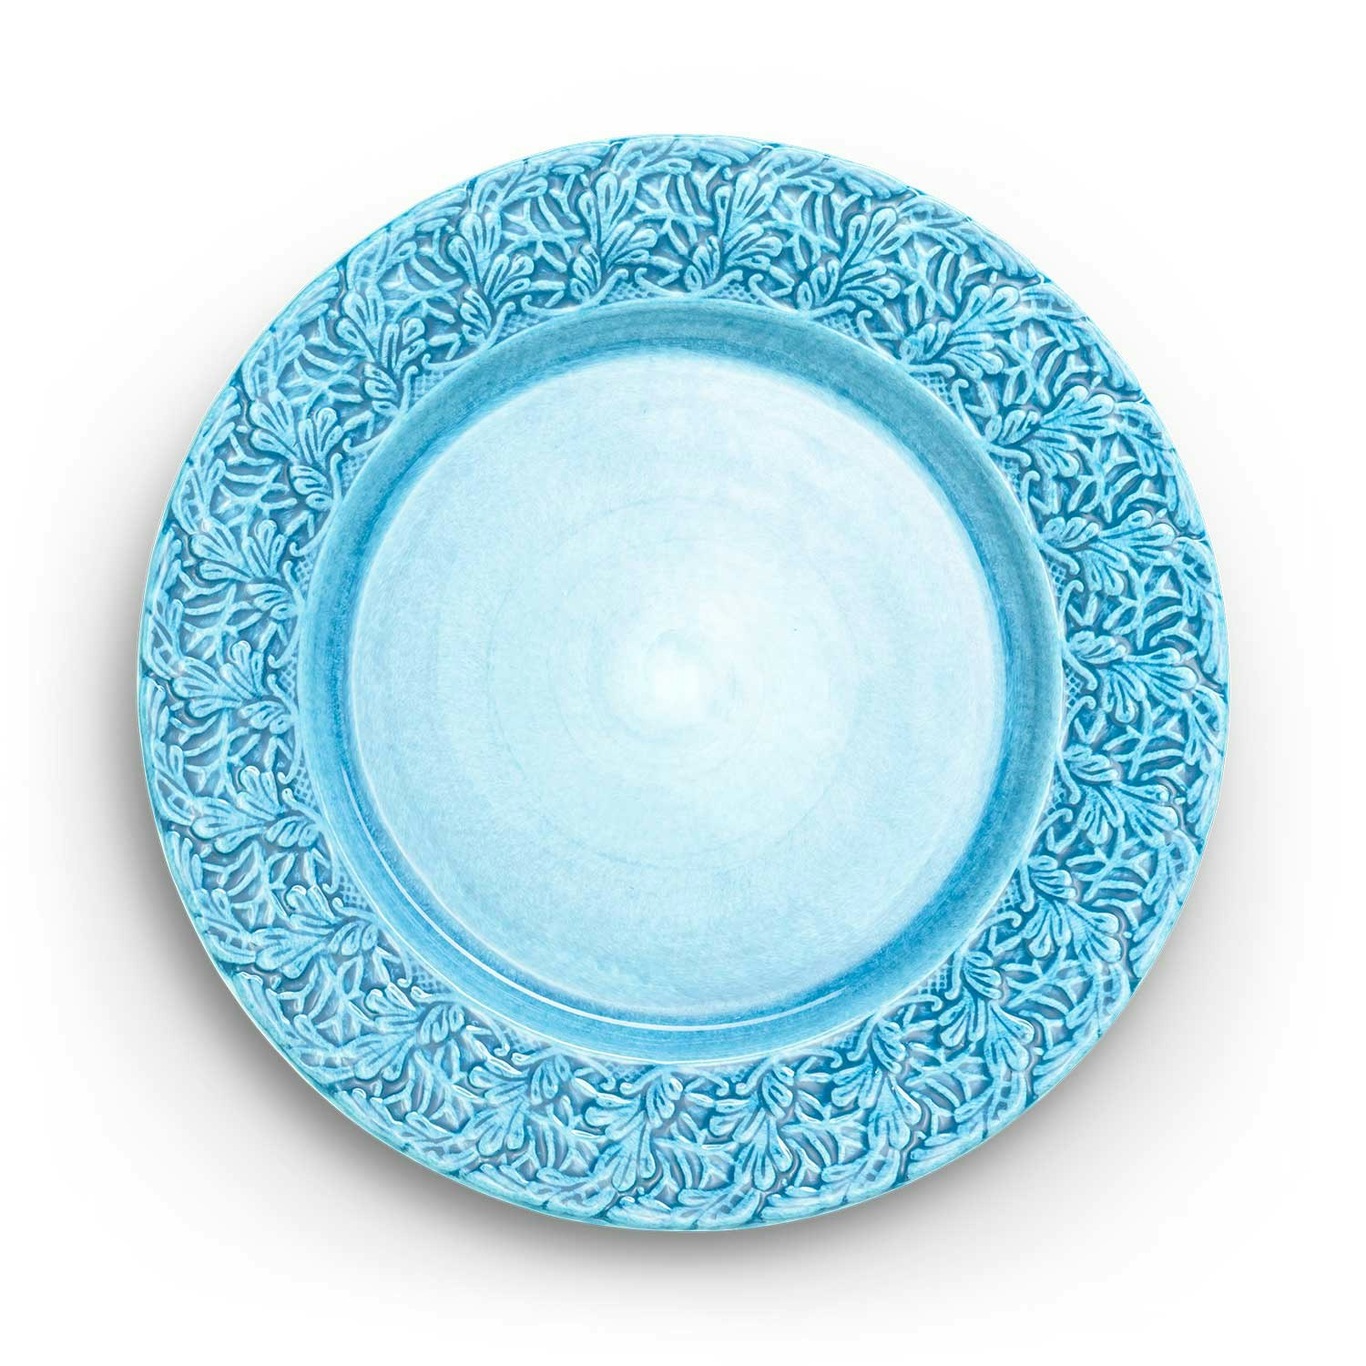 Lace Plate 25 cm, Turquoise